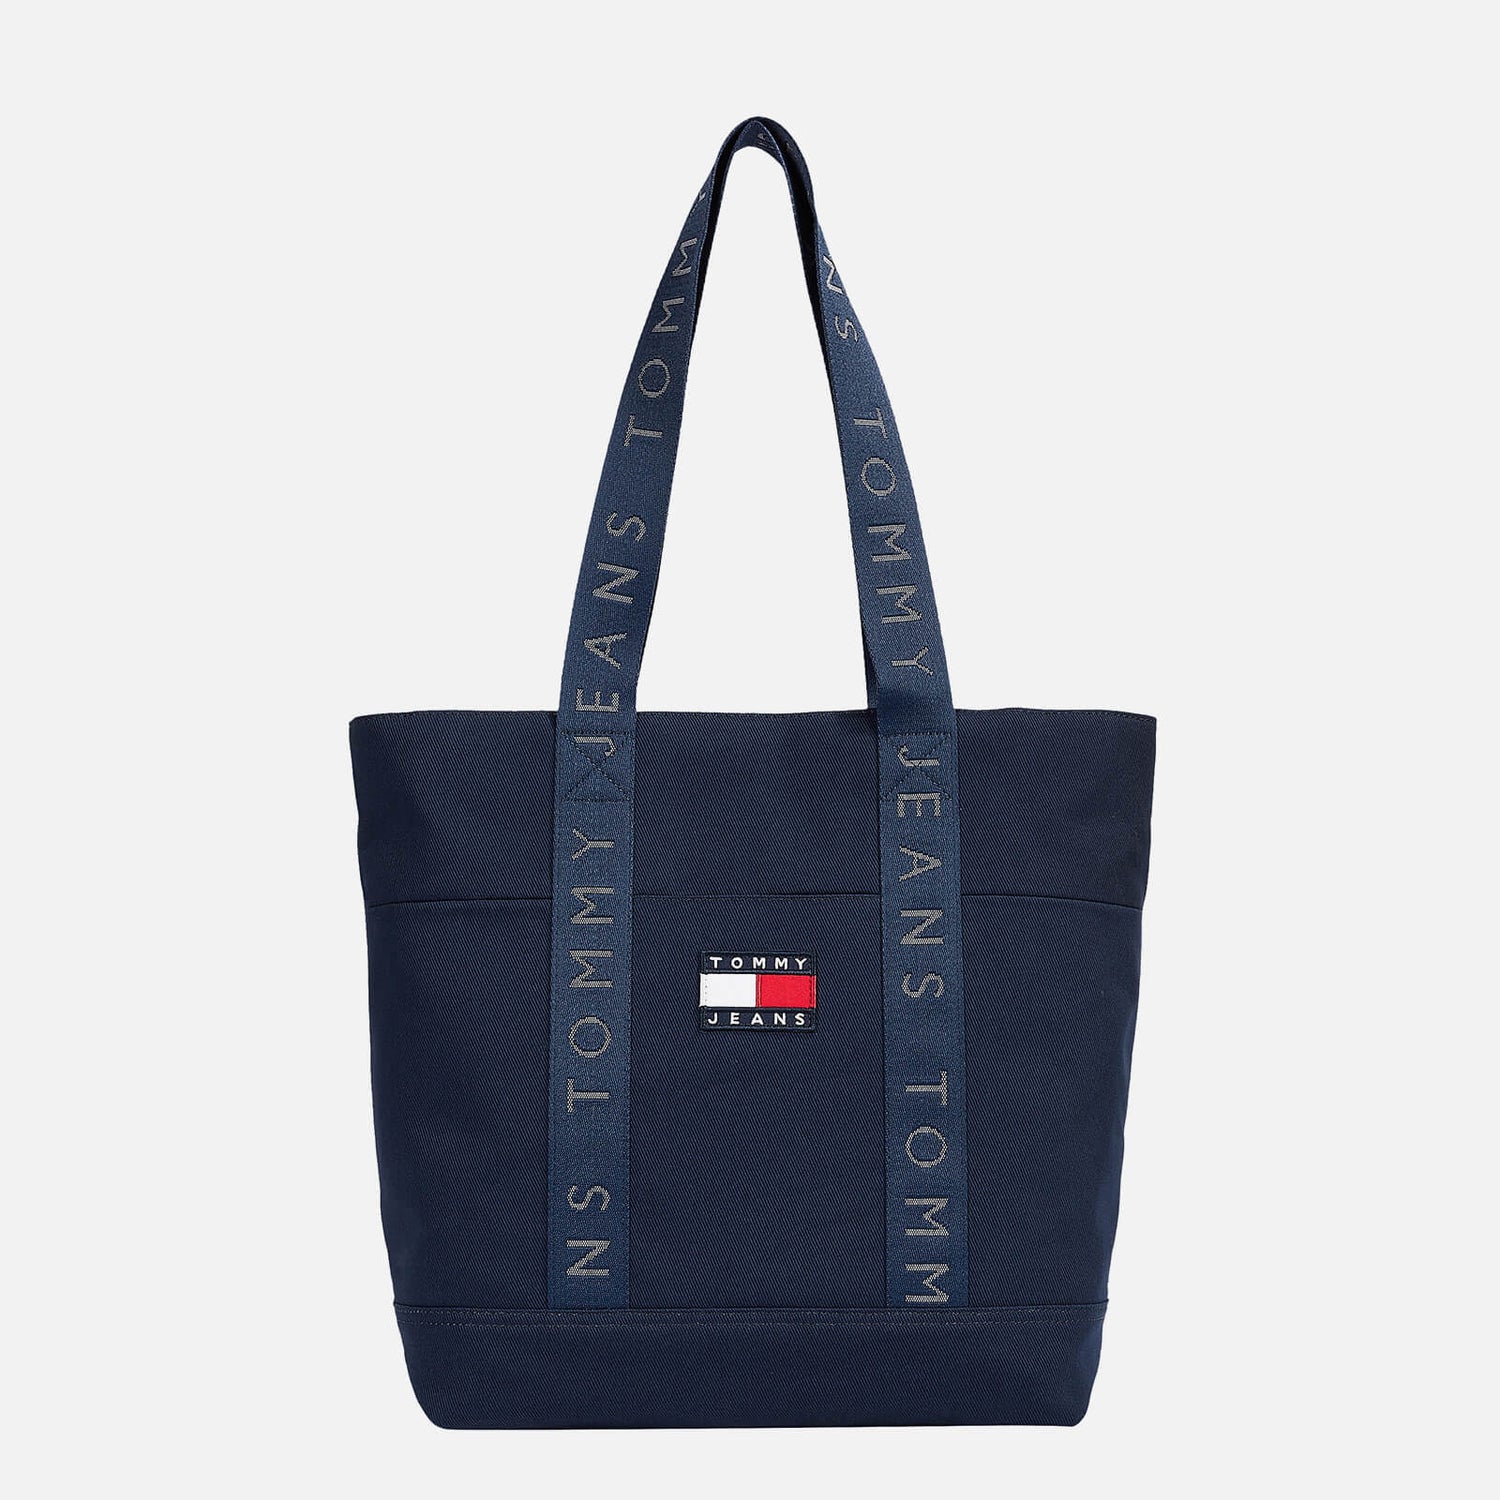 Tommy Jeans Women's Heritage Canvas Tote Bag - Twilight Navy